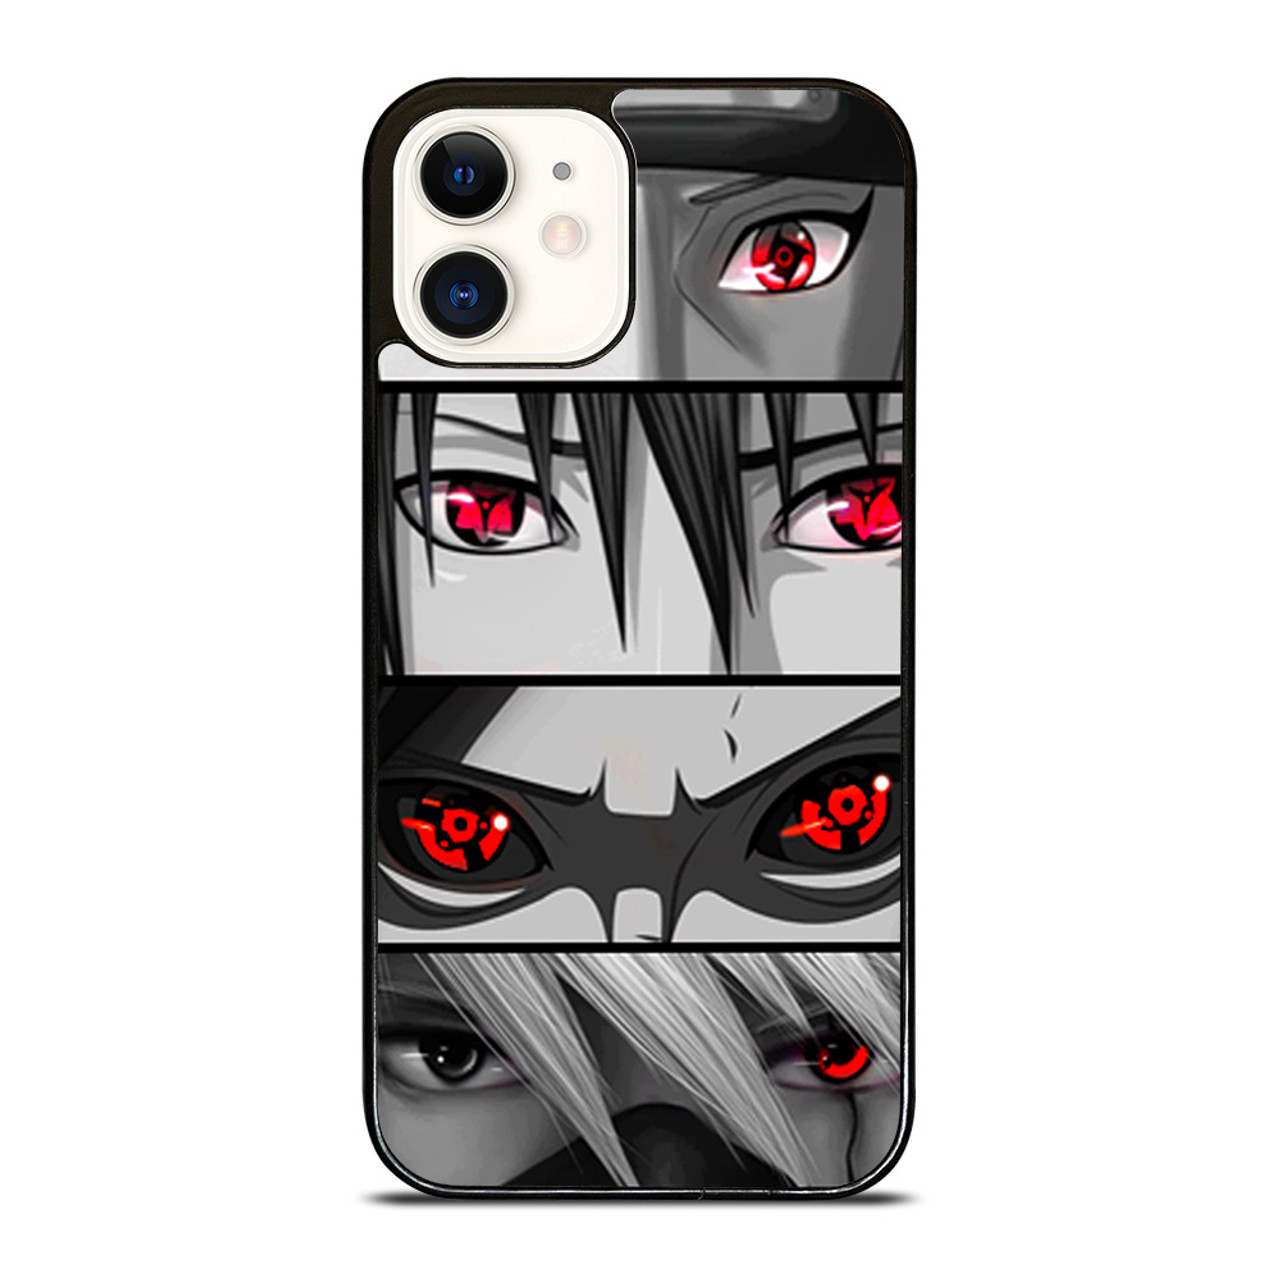 Naruto Uzumaki Cool Anime Glass Back Case for iPhone 12  Mobile Phone  Covers  Cases in India Online at CoversCartcom